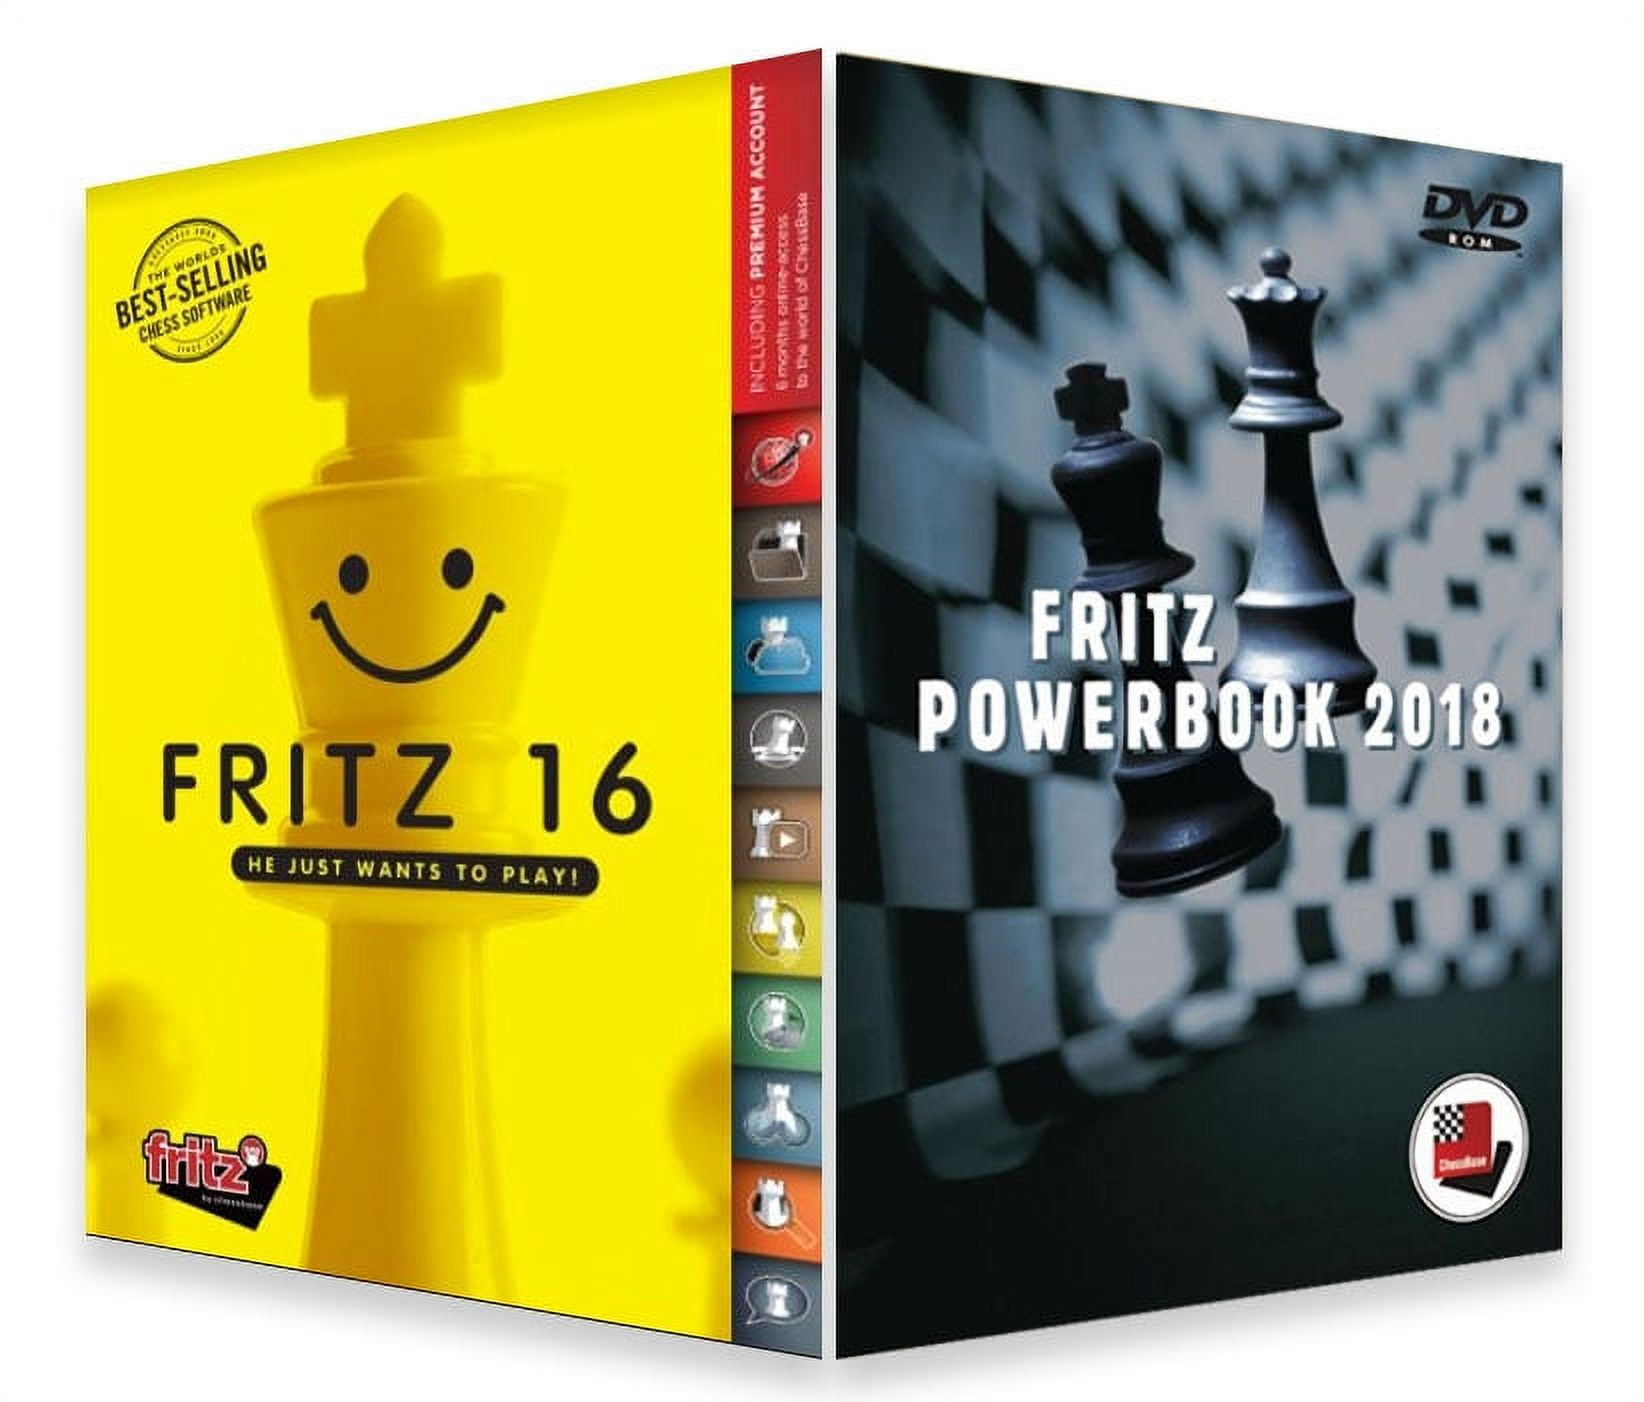 ChessBase's powerful games replayer for *Free*